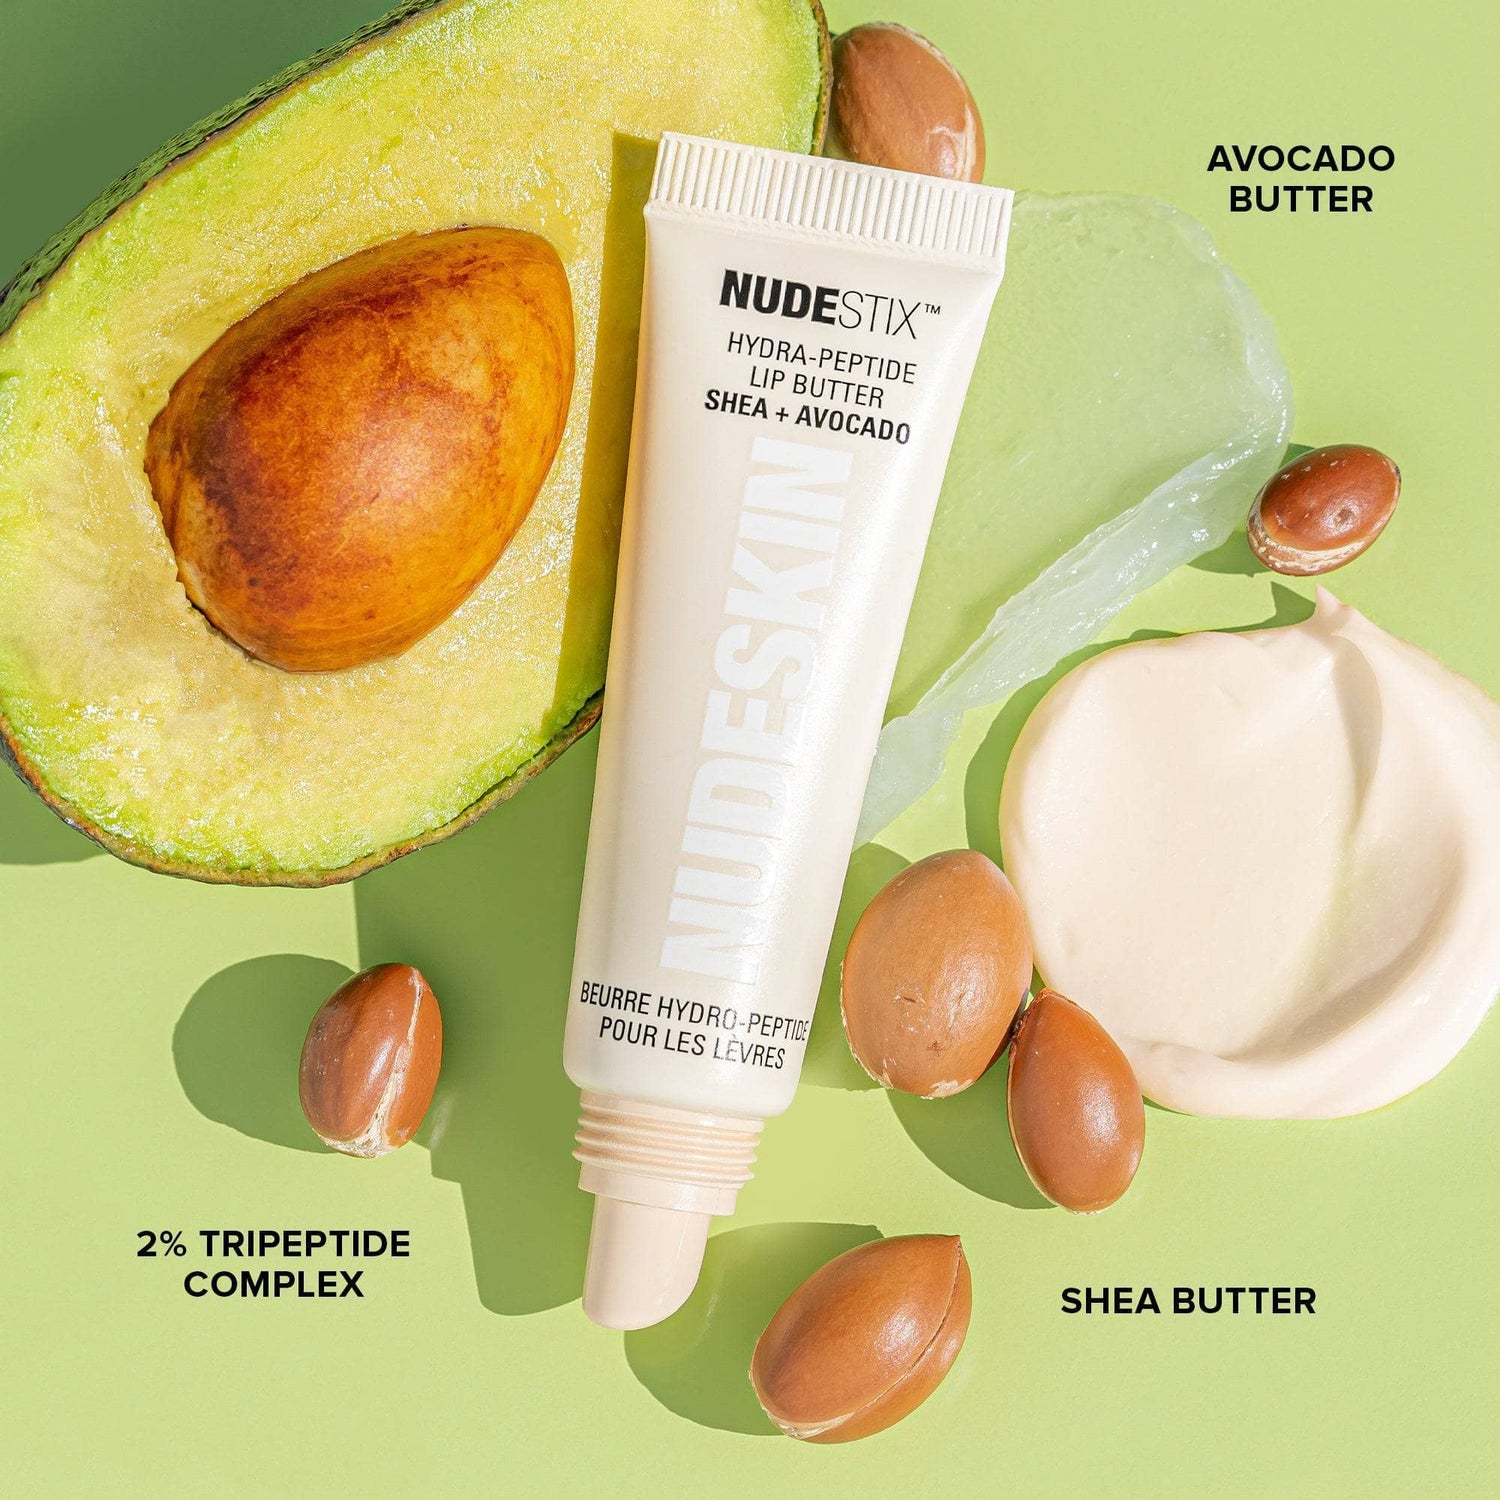 Hydra-Peptide Lip Butter Dolce Nude. Flat lay with avocado and shea butter